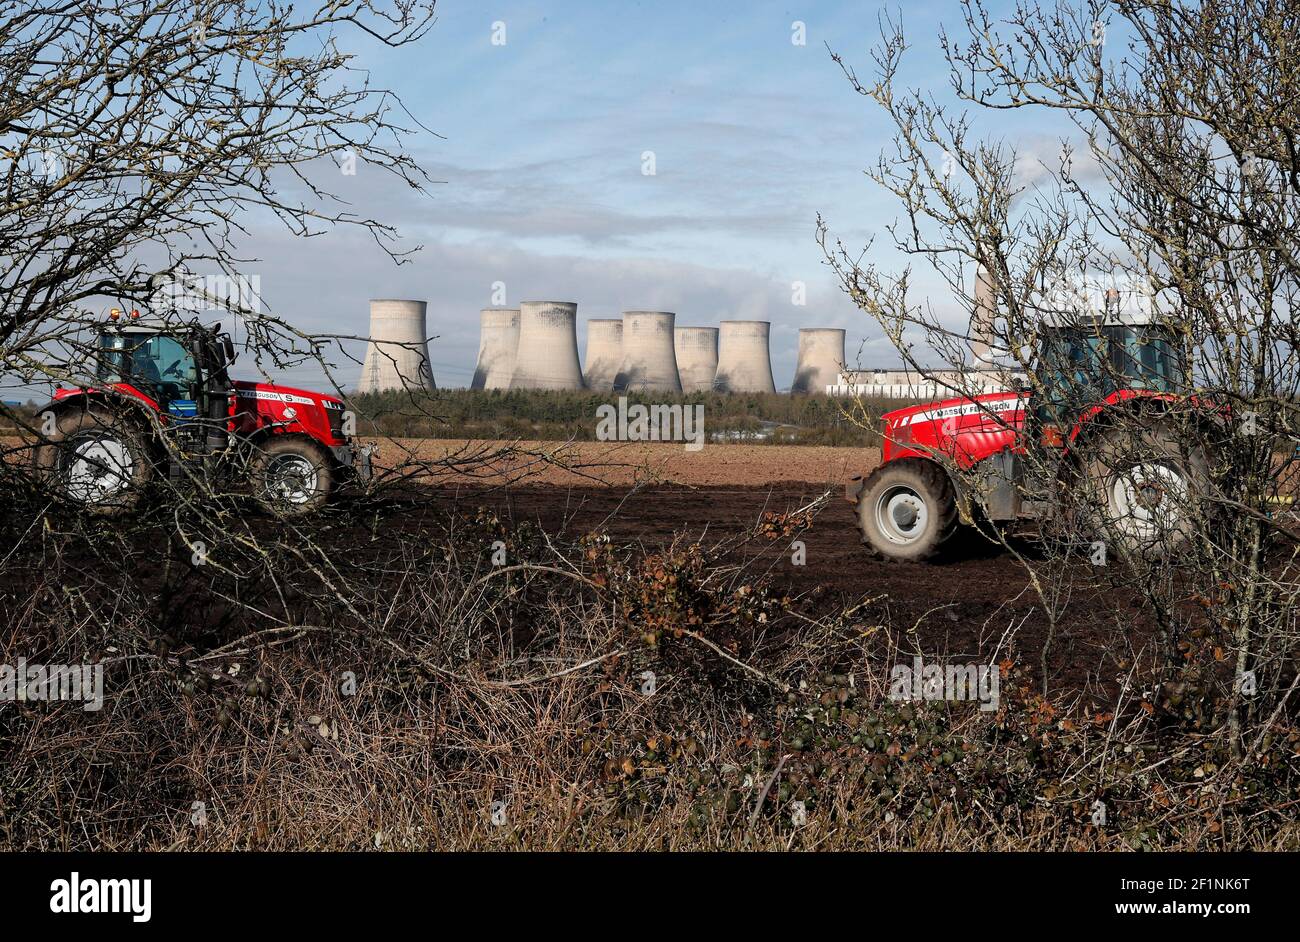 Ratcliffe-on-Soar, Nottinghamshire, UK. 9th March 2021. Farmers work near Ratcliffe-on-Soar Power Station as Rushcliffe Borough Council is to discuss an expression of interest for UniperÕs coal-powered Power Station site to accommodate a nuclear fusion reactor when it is decommissioned in 2025. Credit Darren Staples/Alamy Live News. Stock Photo